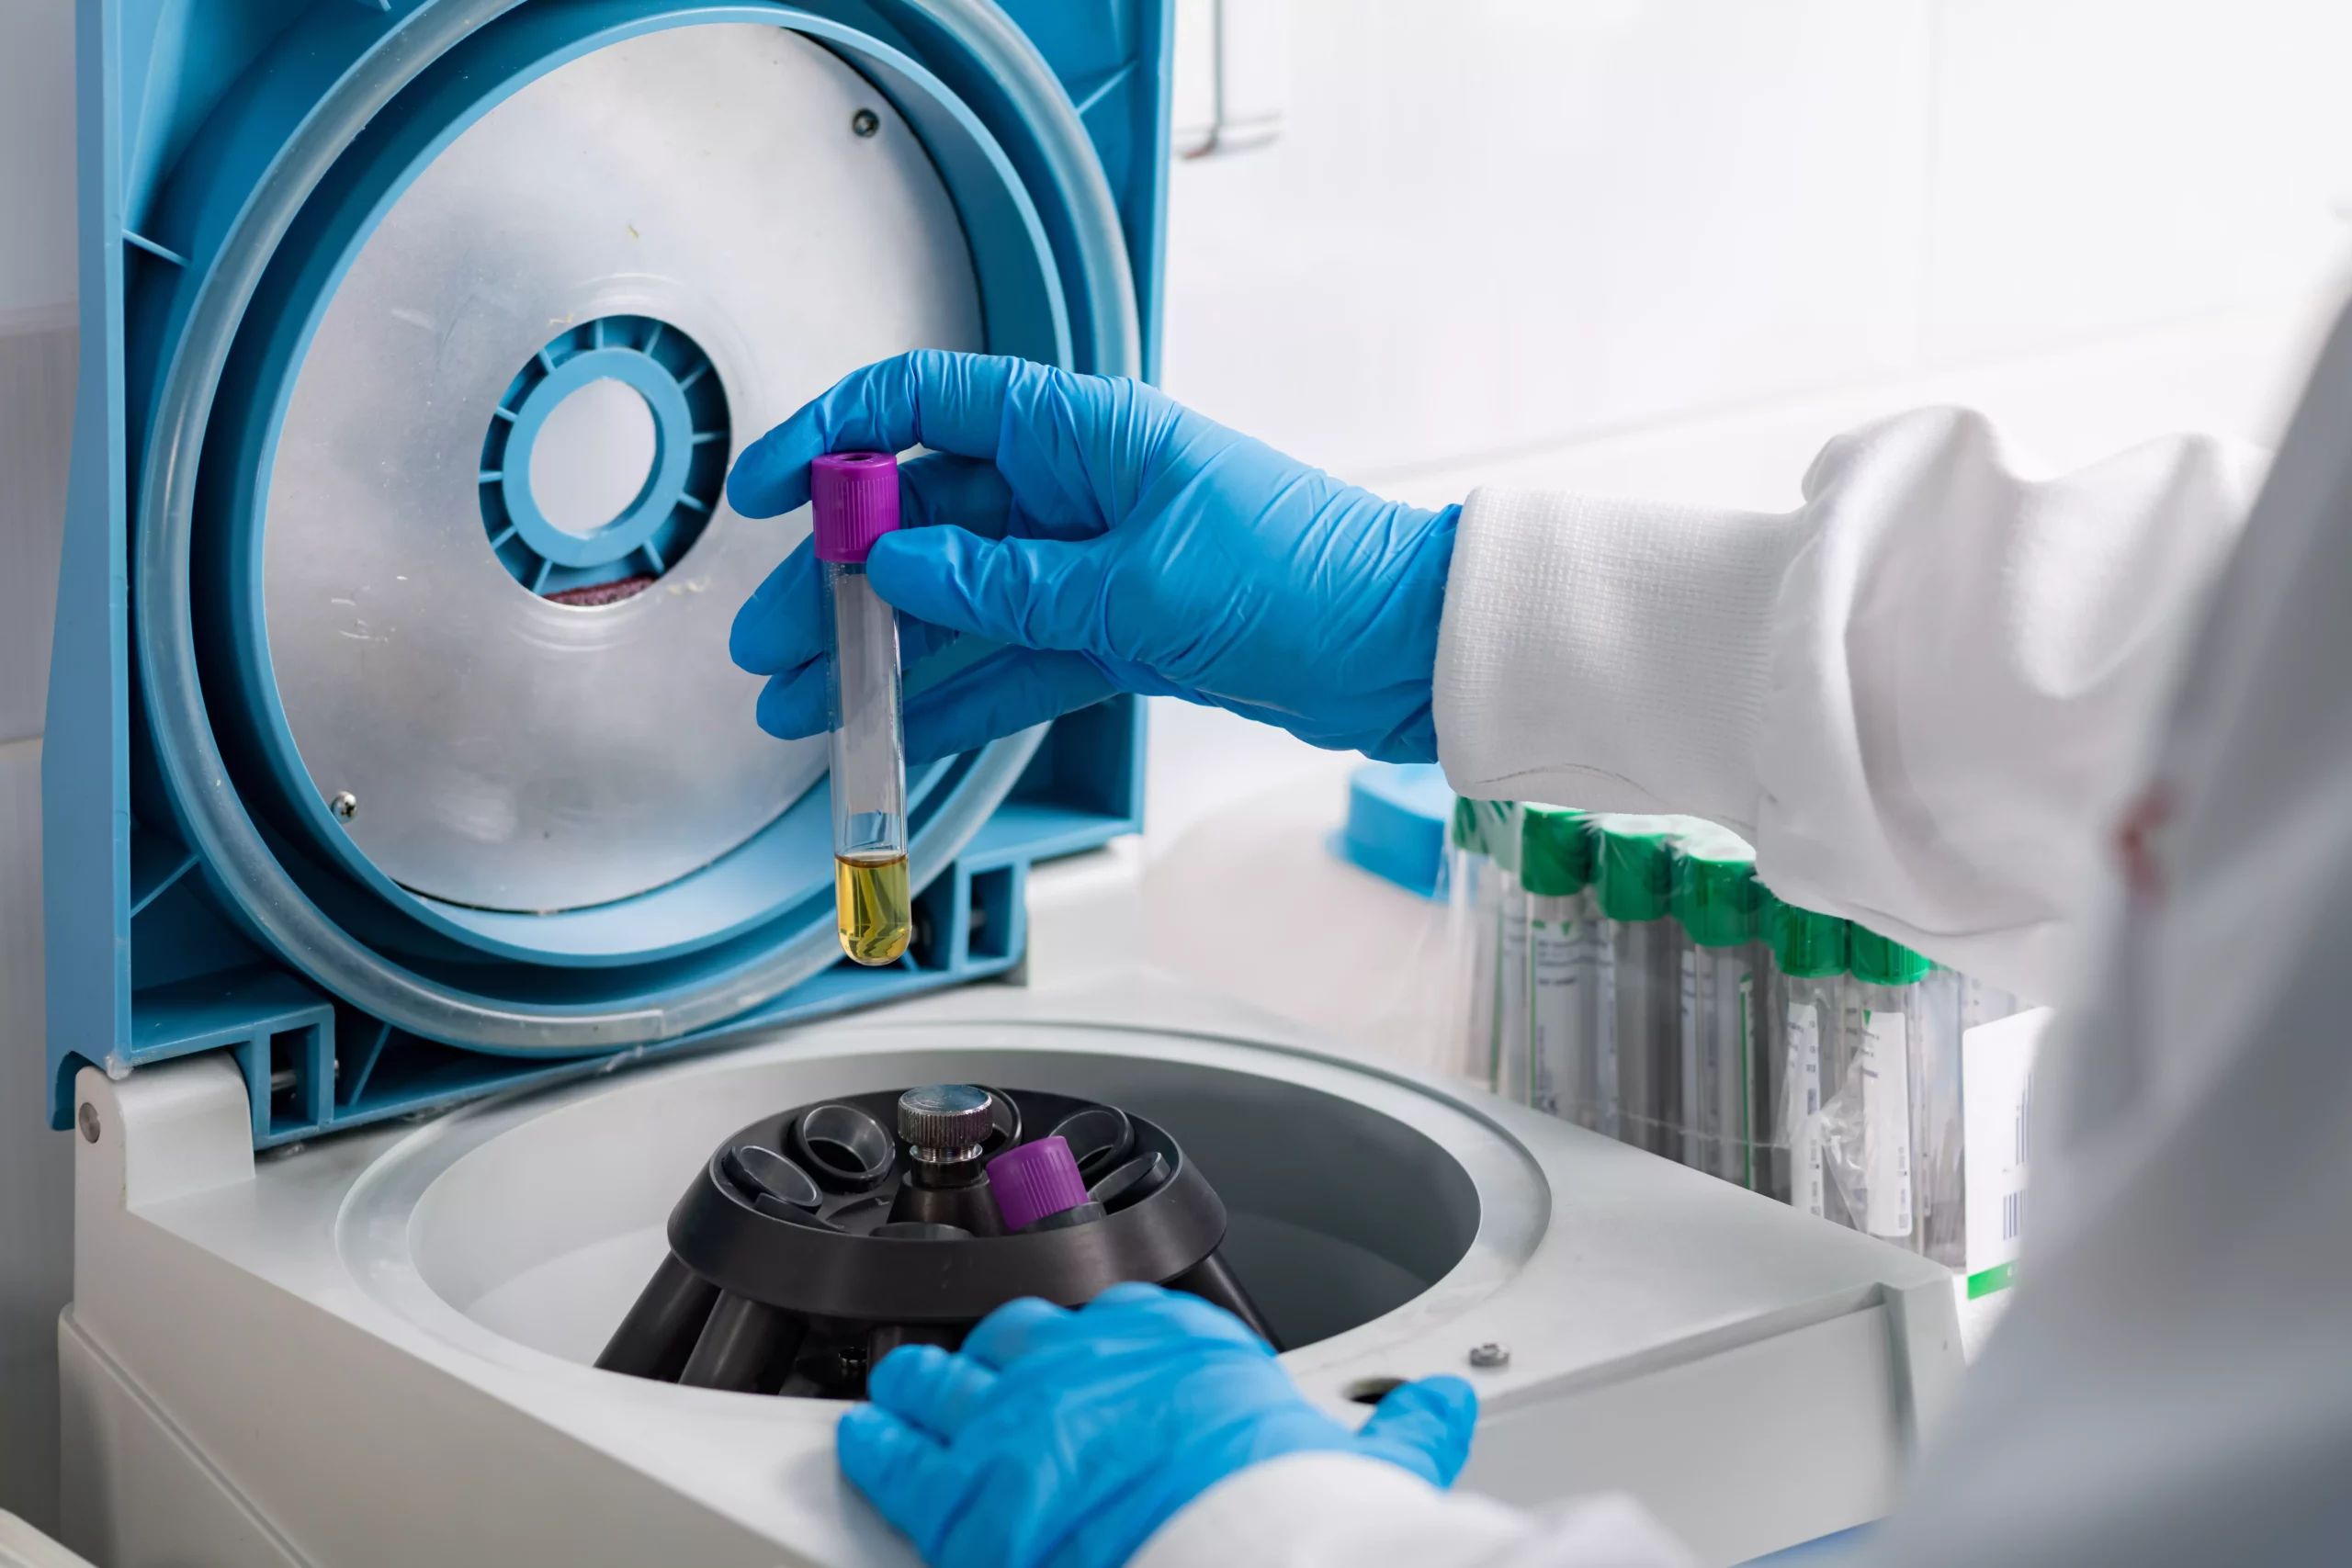 Scientist in lab operating centrifuge with blue gloves on hands